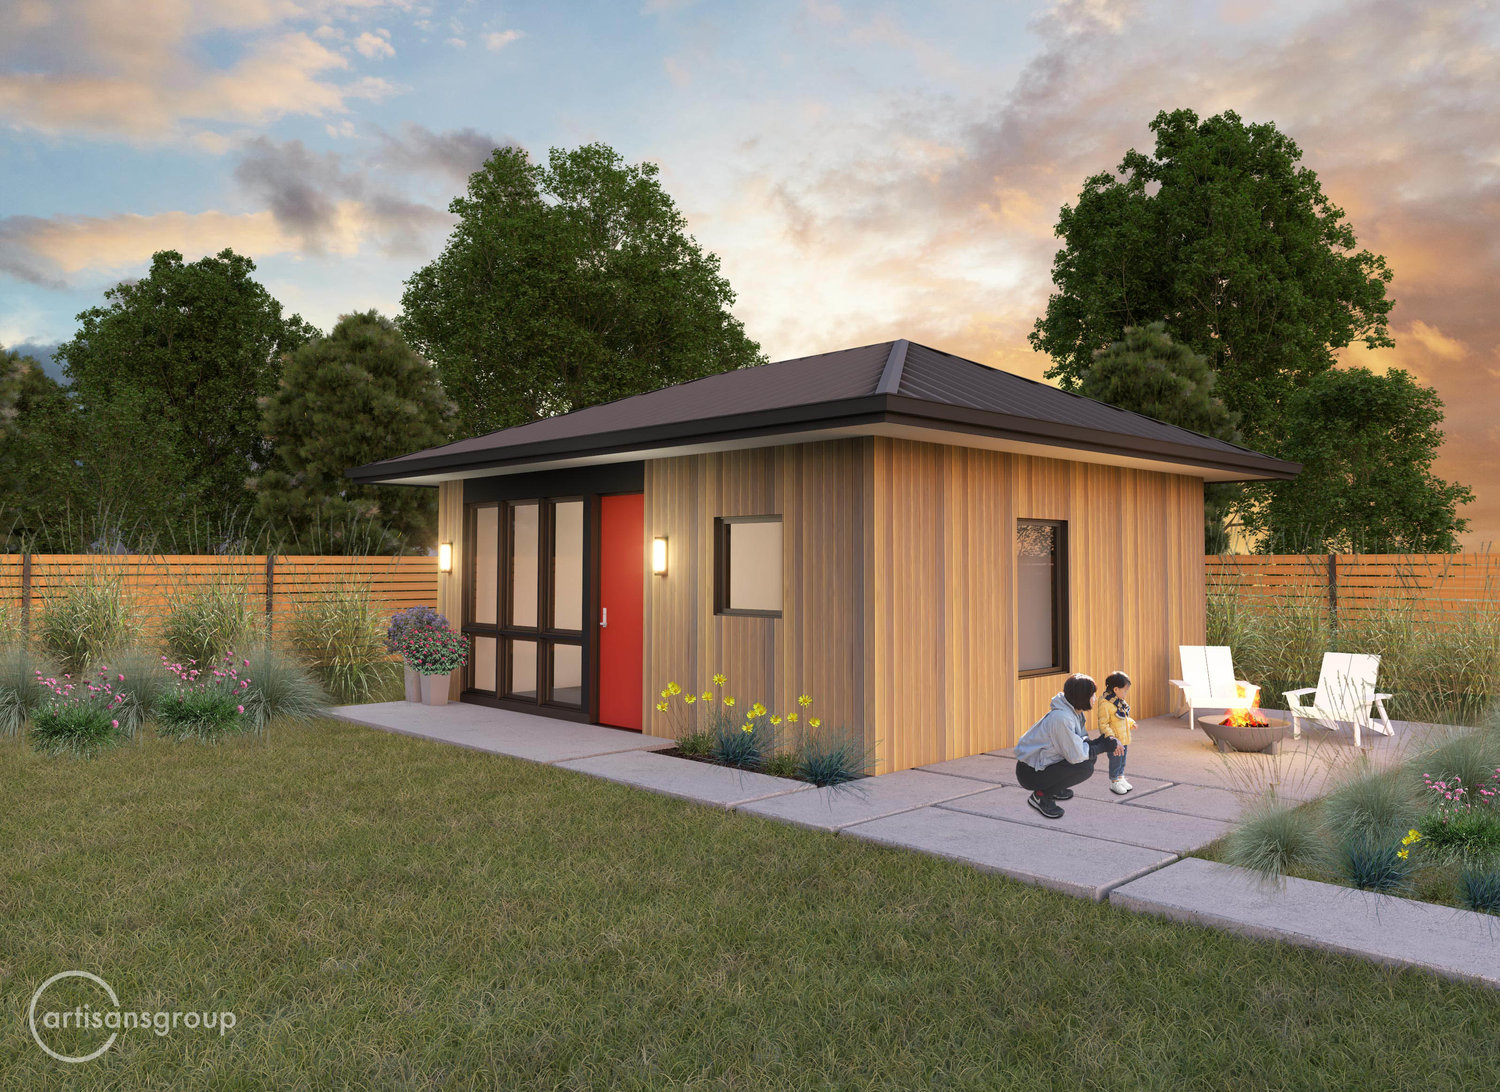 Accessory dwelling units, such as the structure pictured above, are allowed to be permitted and built on single-family properties in Lacey.